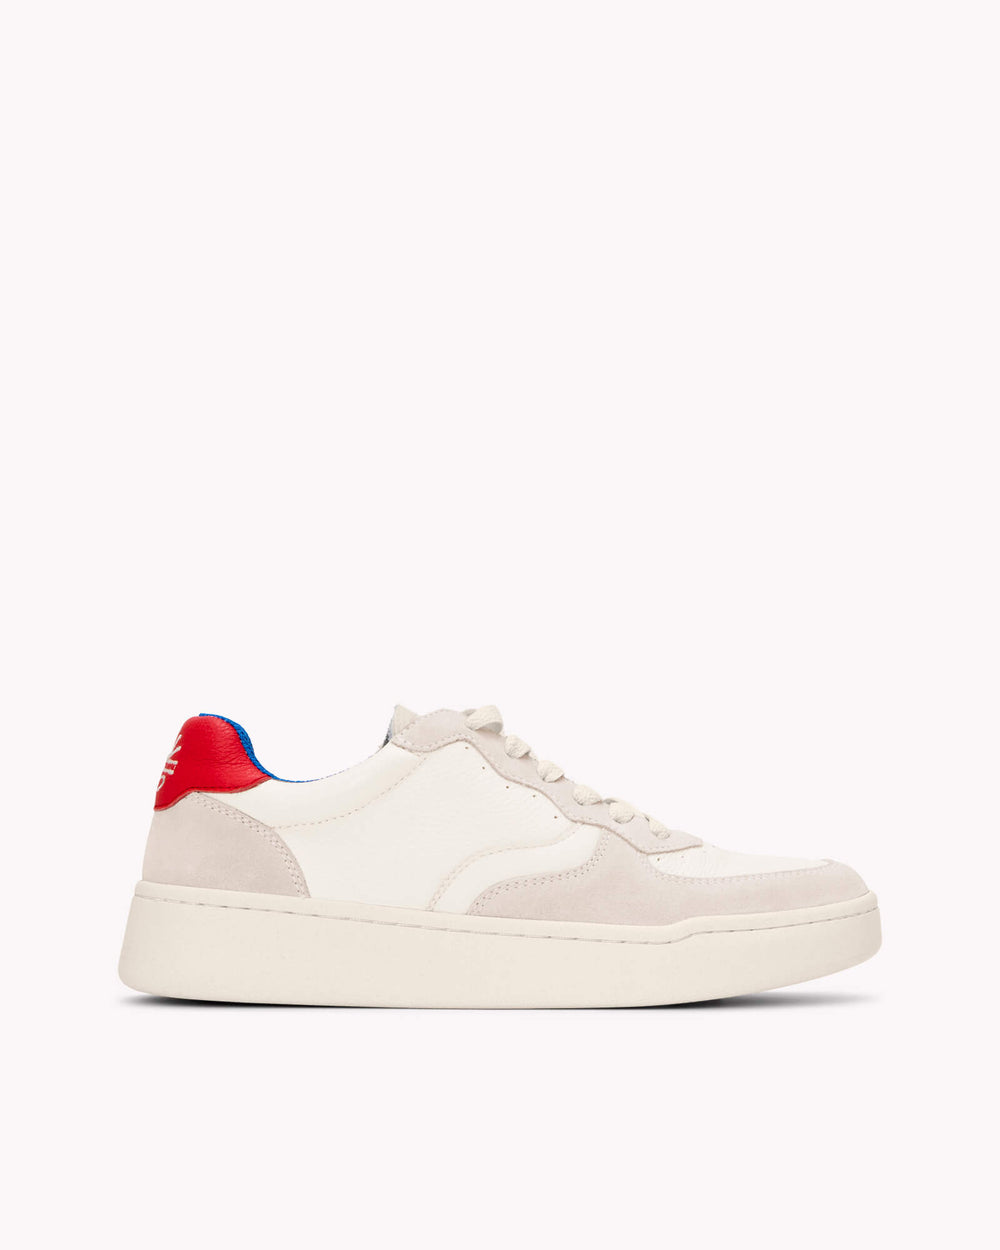 The Roma - Classic - White / Red / French Blue - Women's